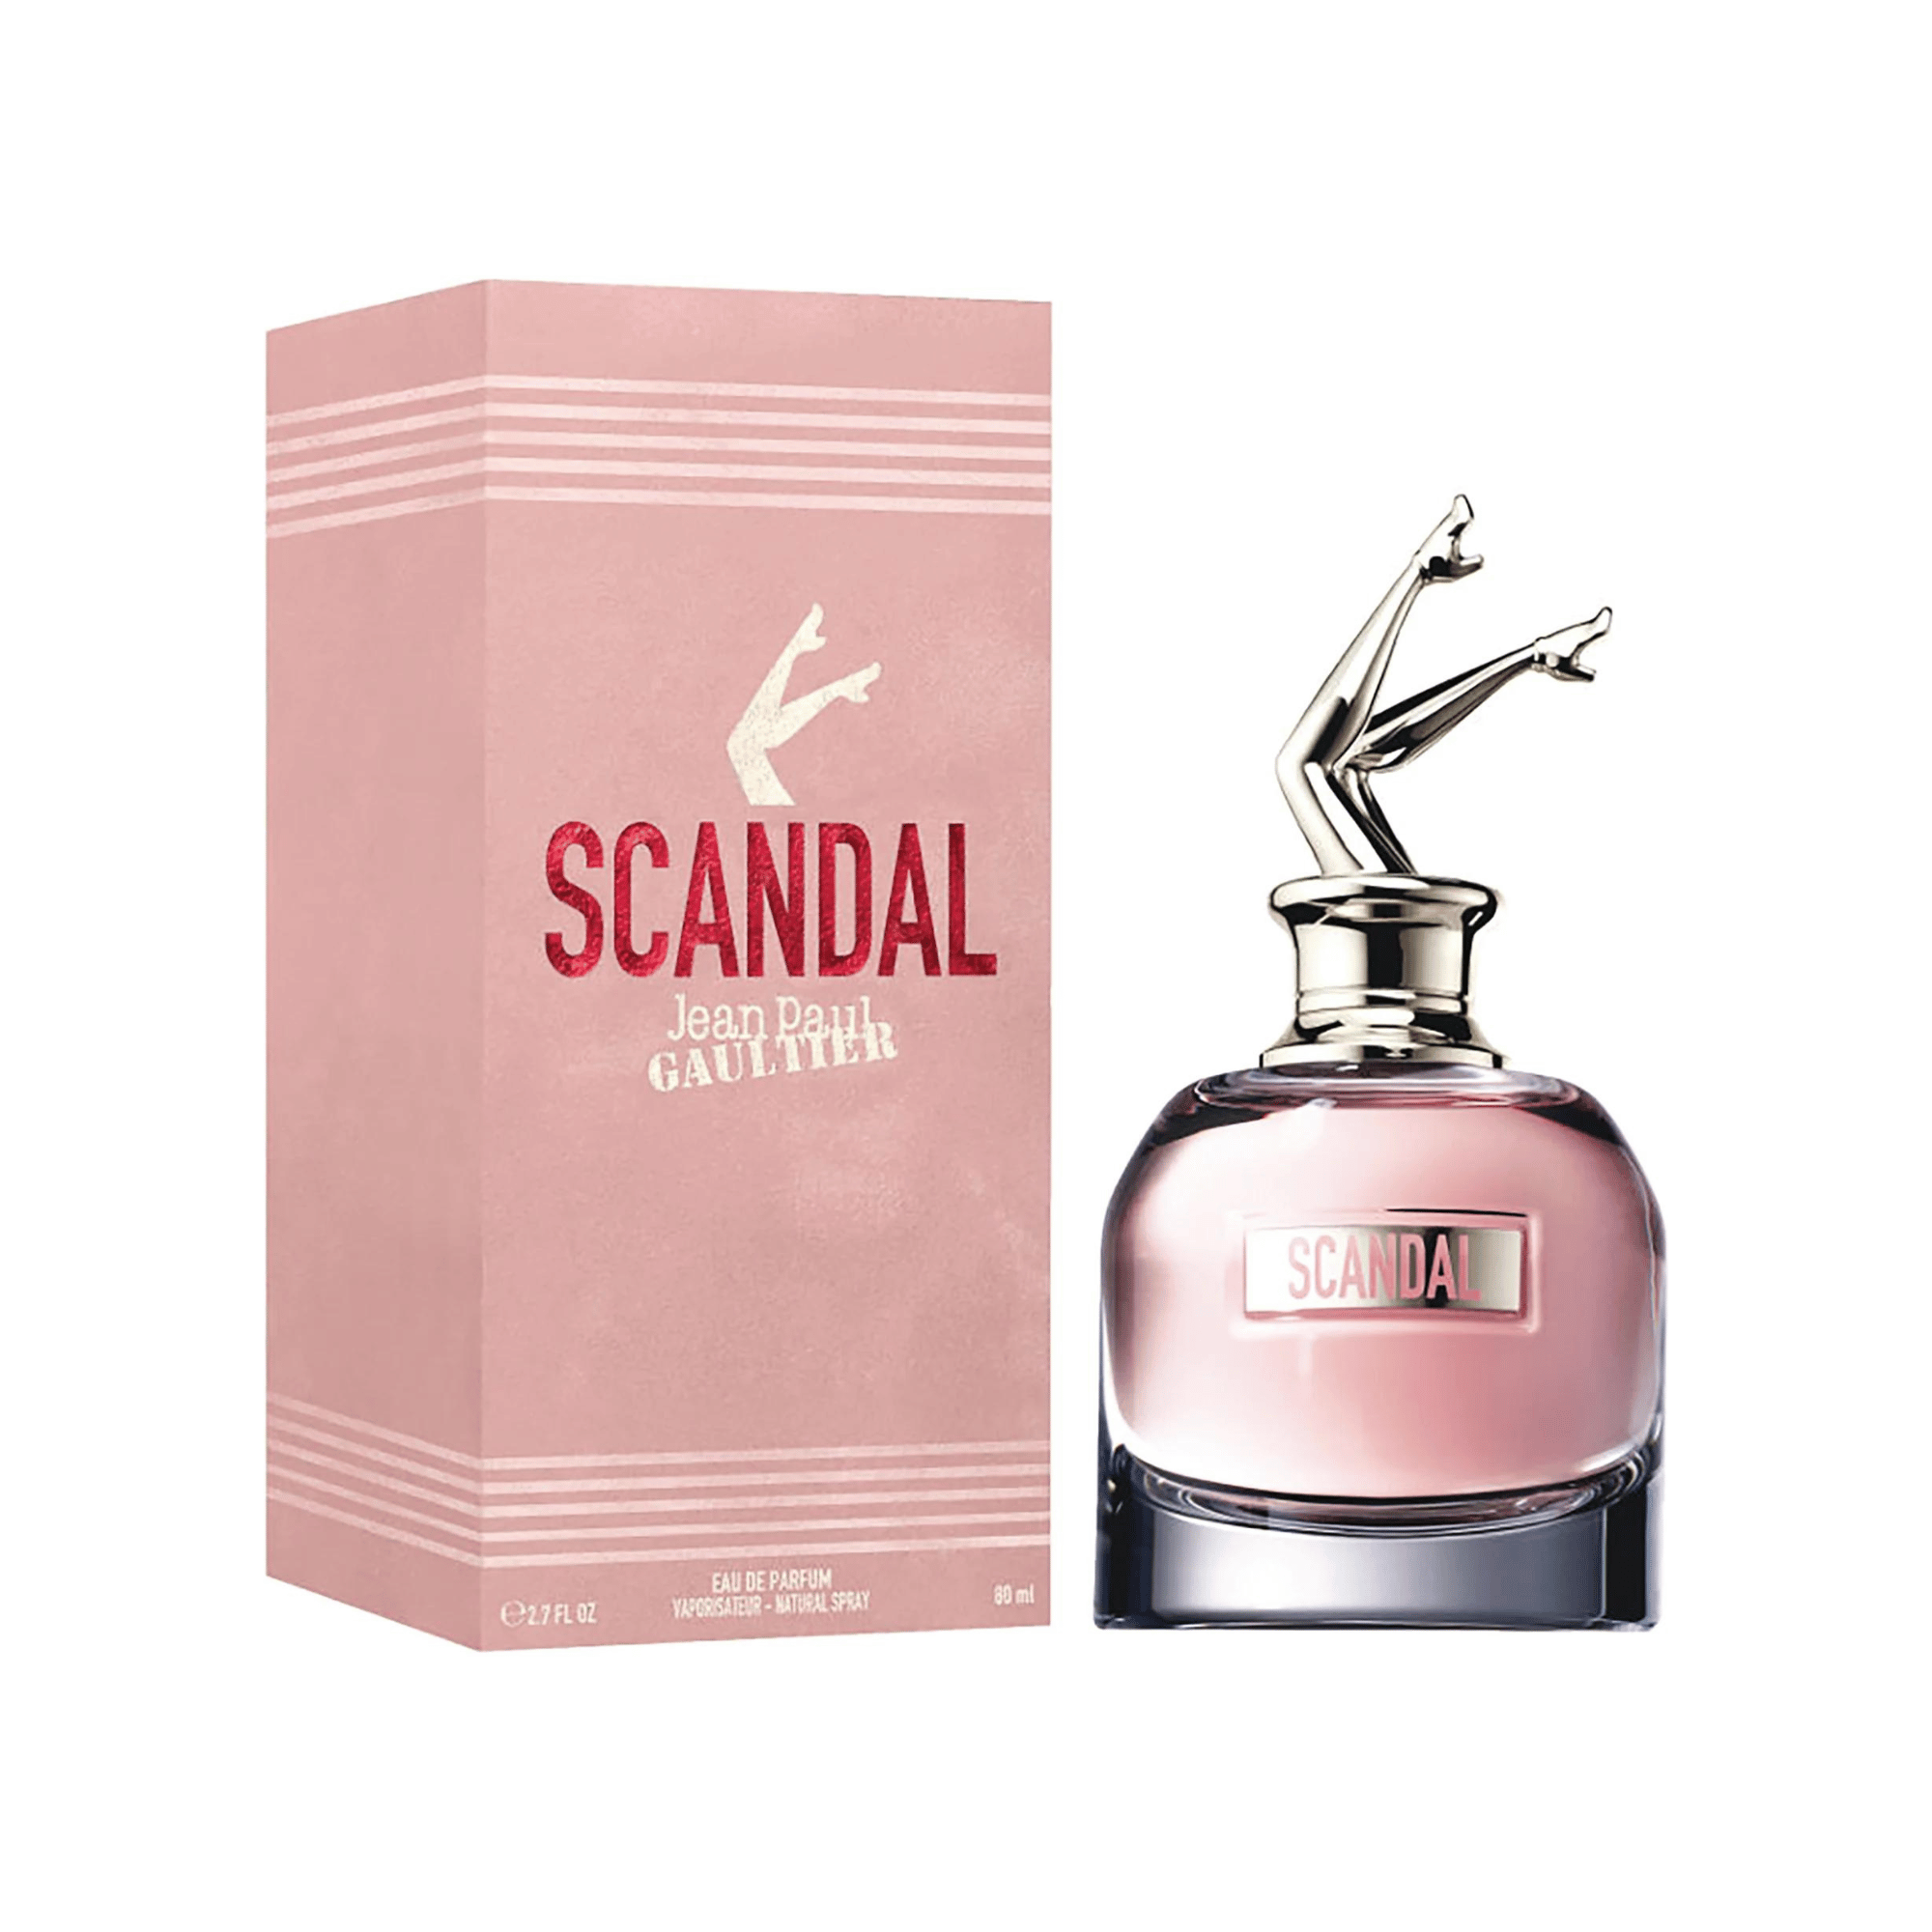 Scandal By Jean Paul Gaultier Perfume sample & Subscription